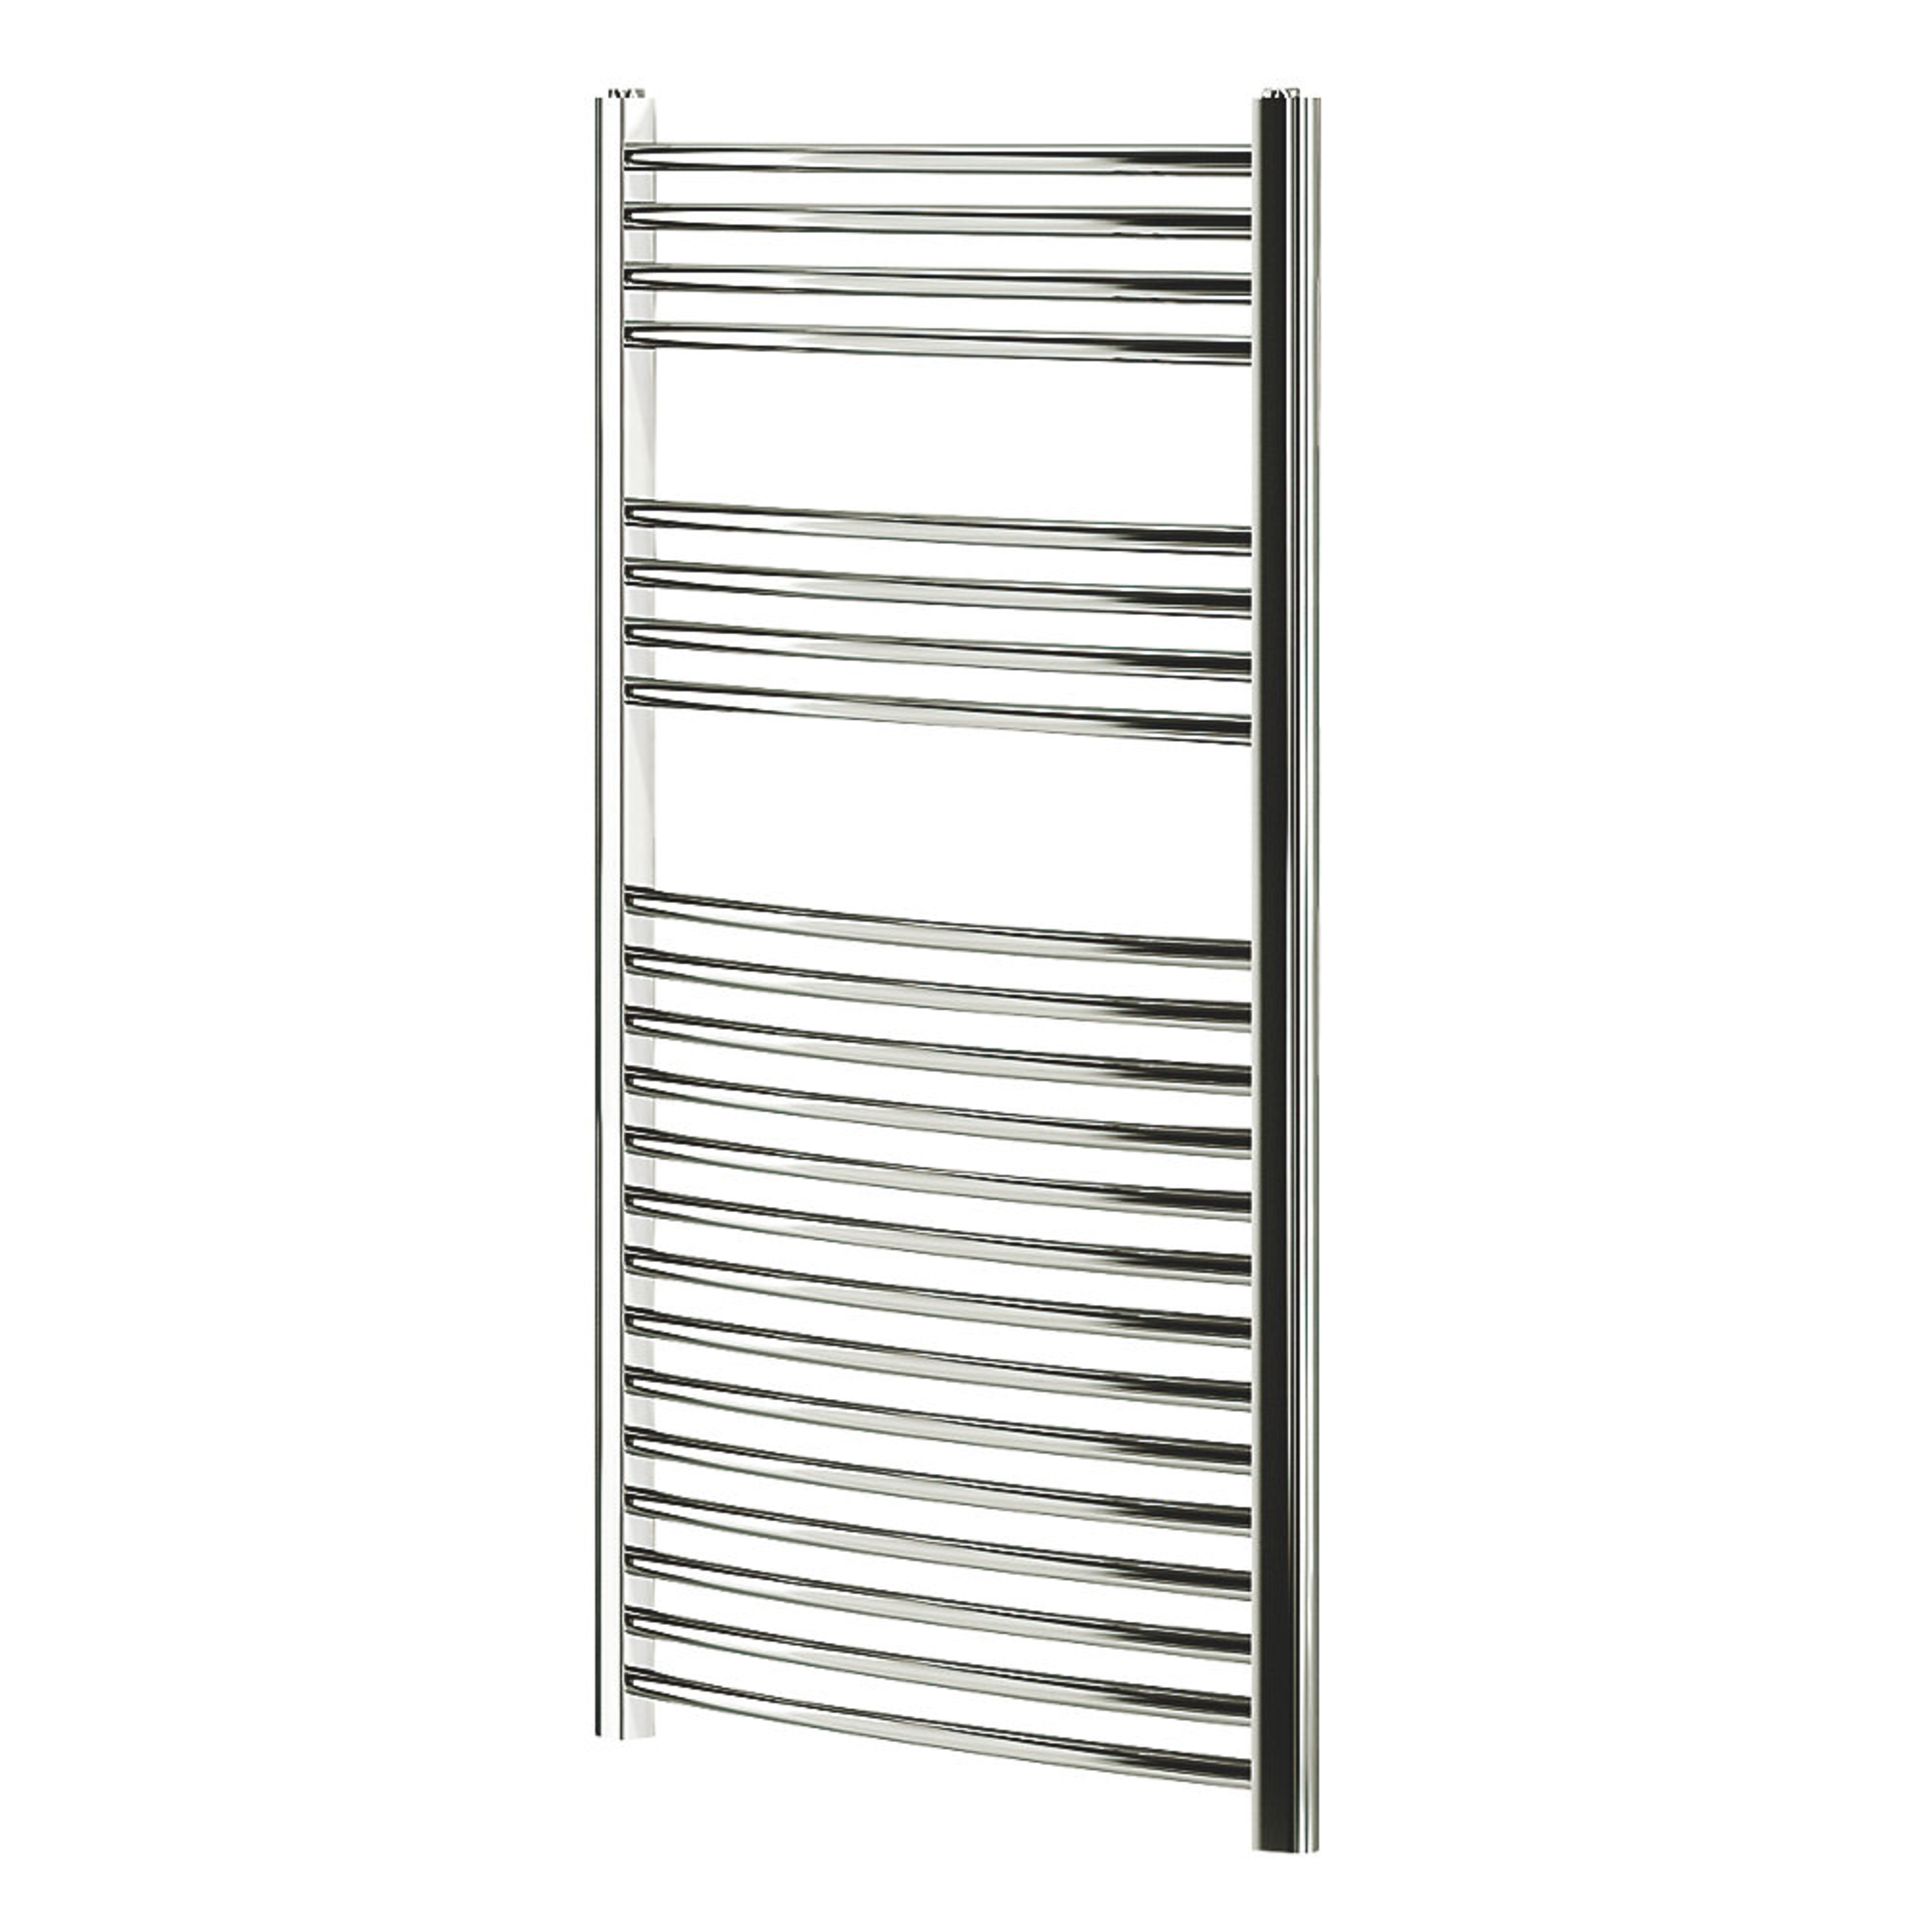 (OS137) 1100 X 600MM BLYSS CURVED TOWEL RADIATOR CHROME. High quality chrome-plated steel - Image 2 of 2